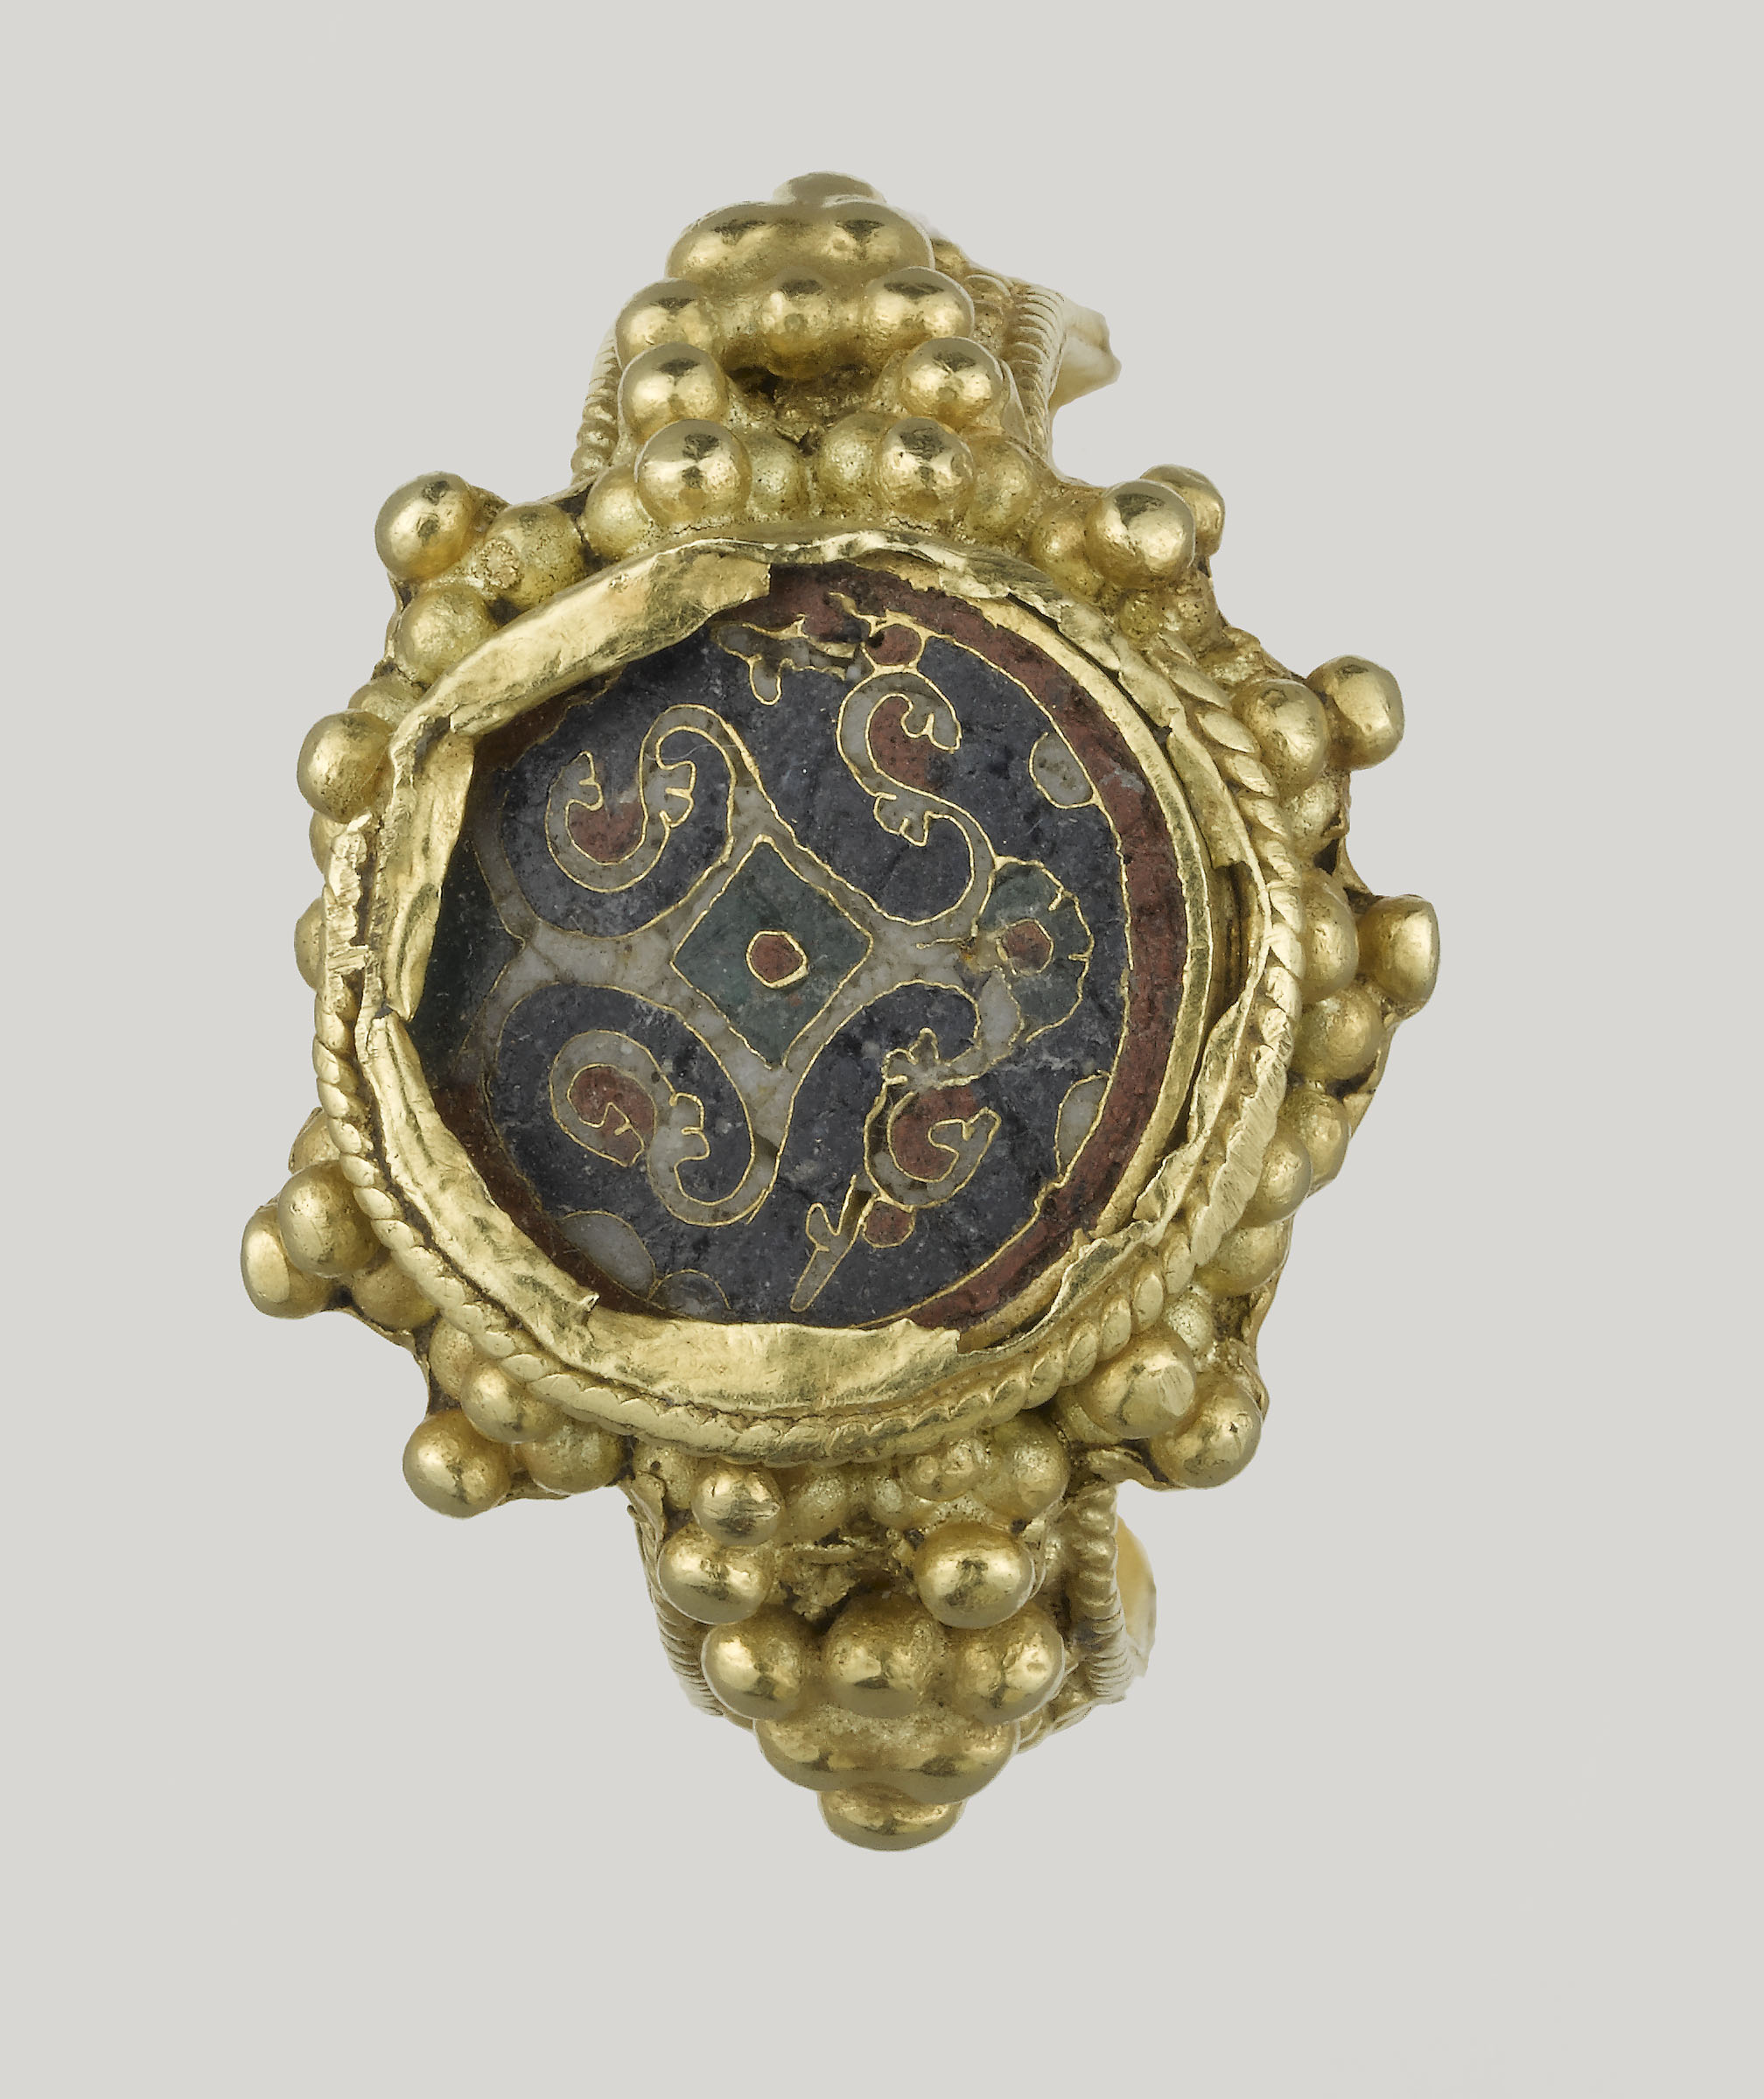 Ottonian Ring by Unknown Artist - around 800 Musée de Cluny